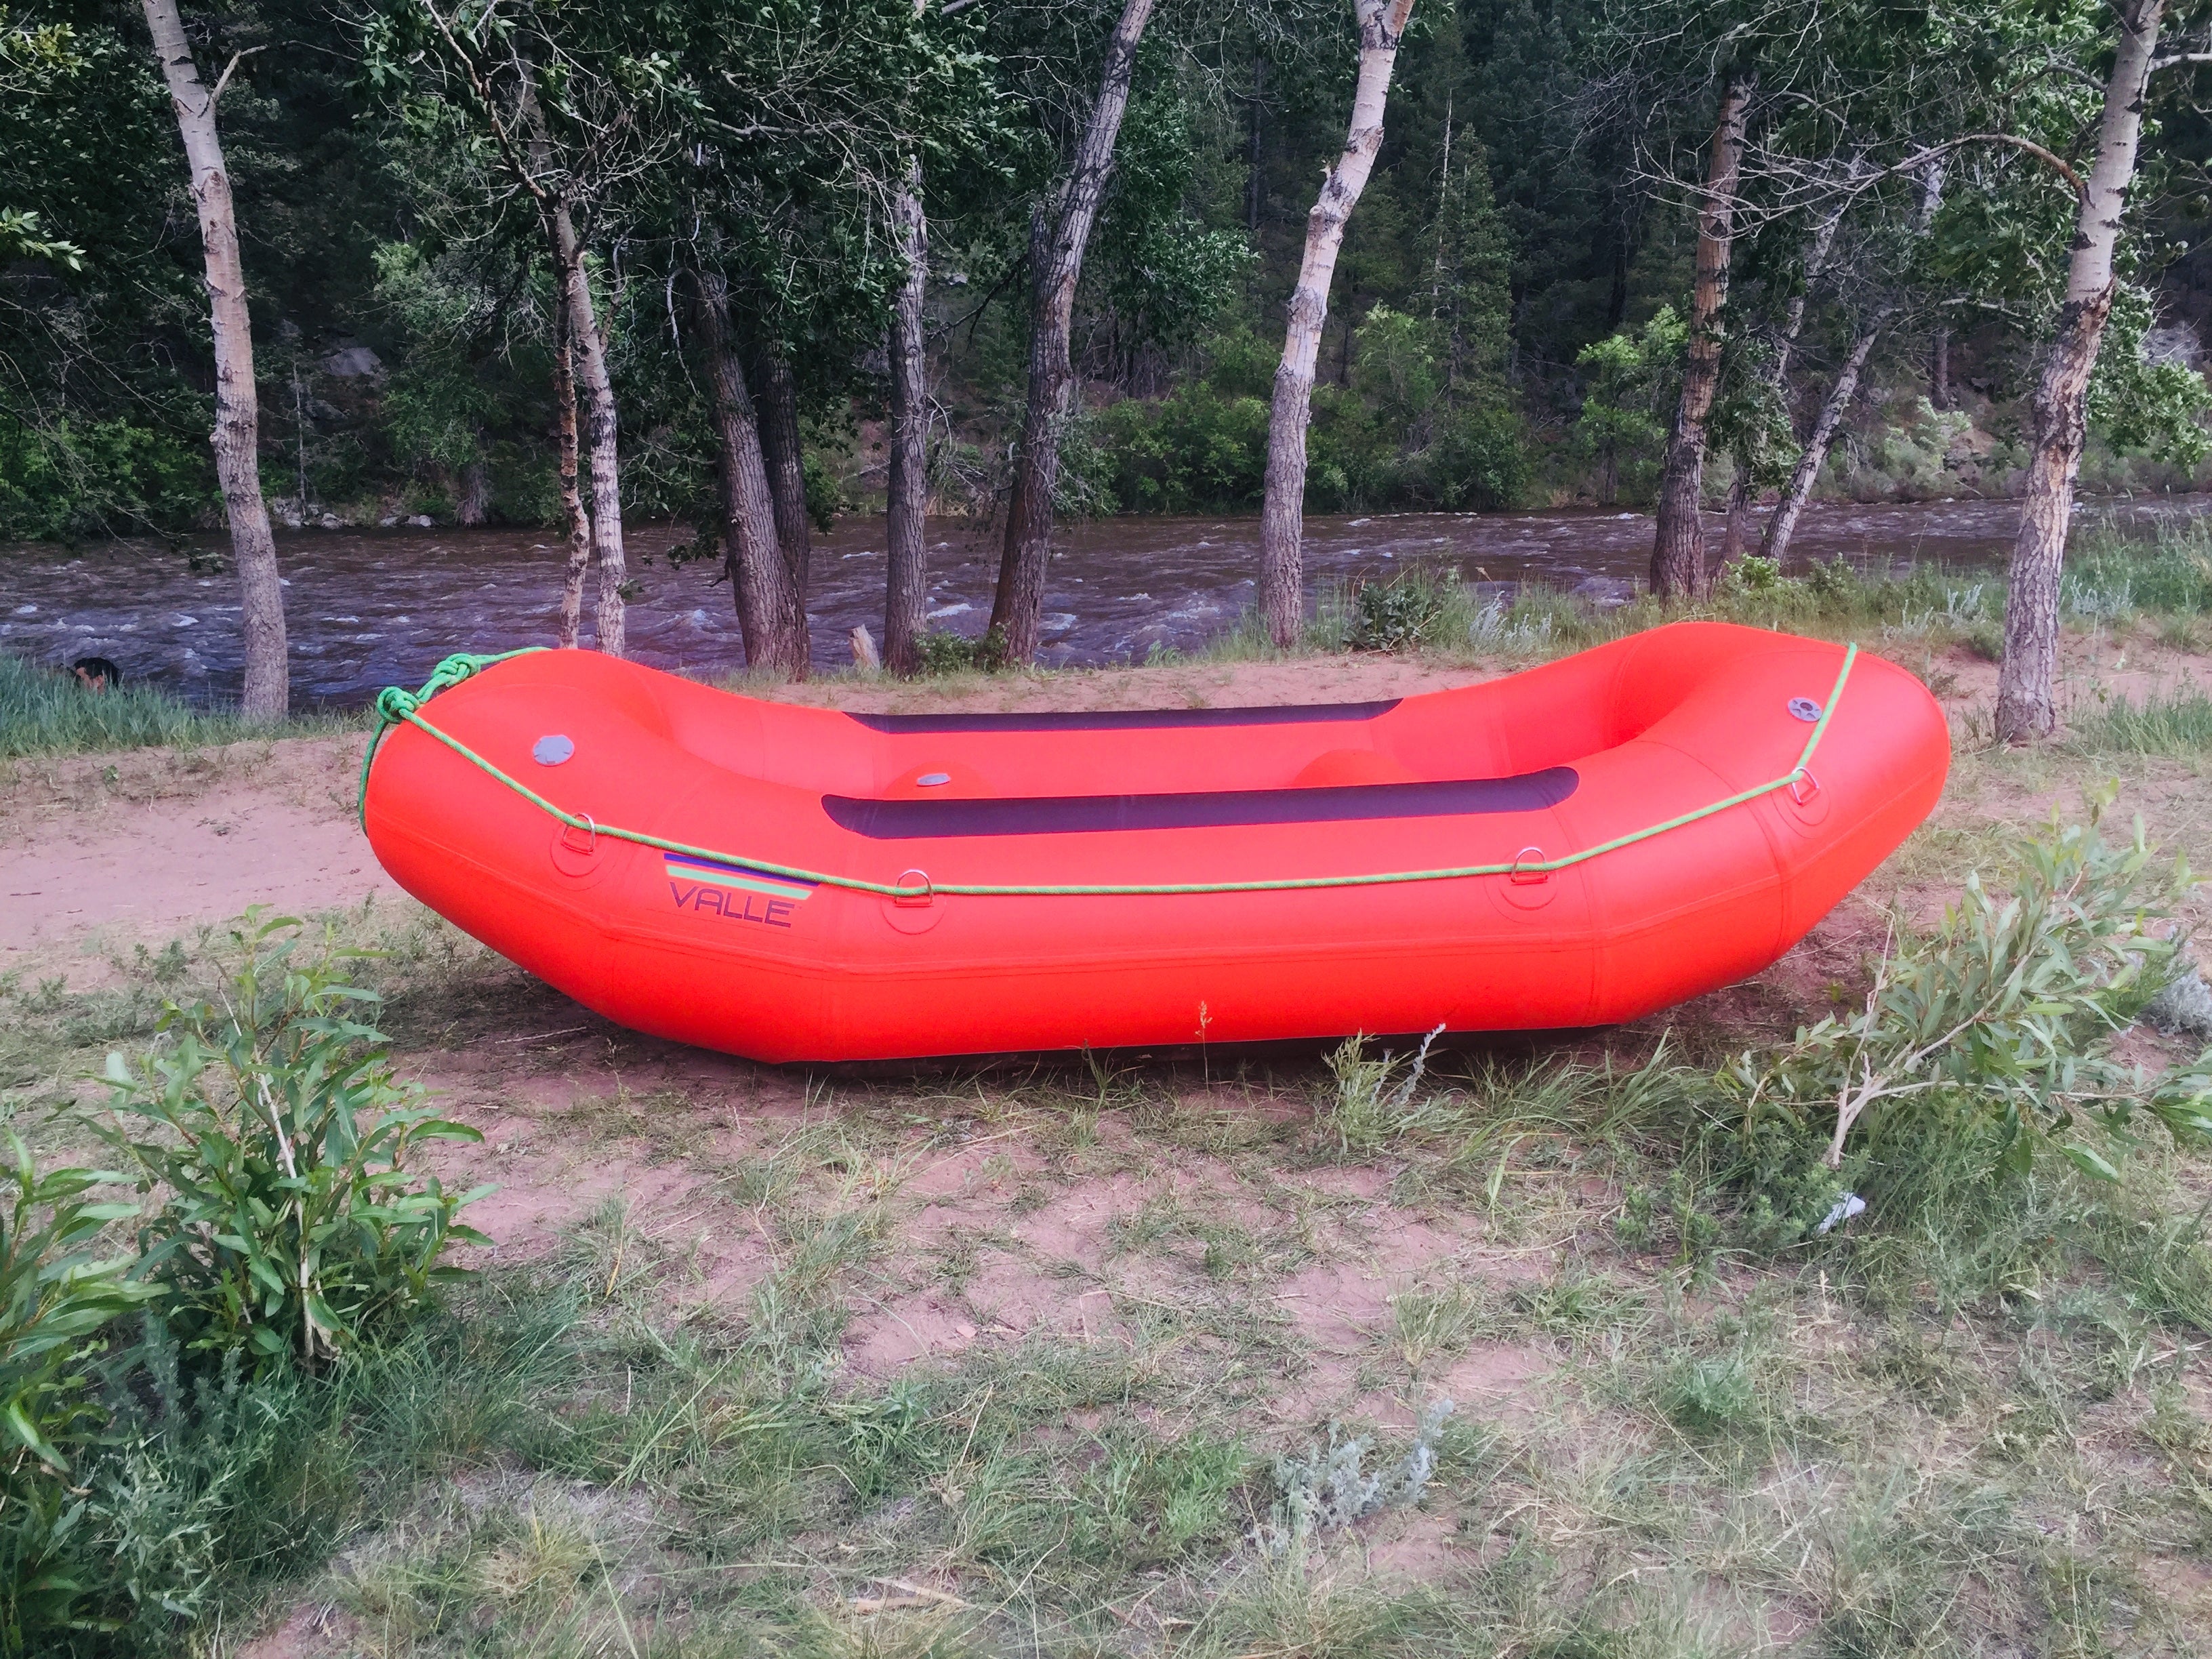 9.5 Foot Whitewater Raft - "The Taquito"